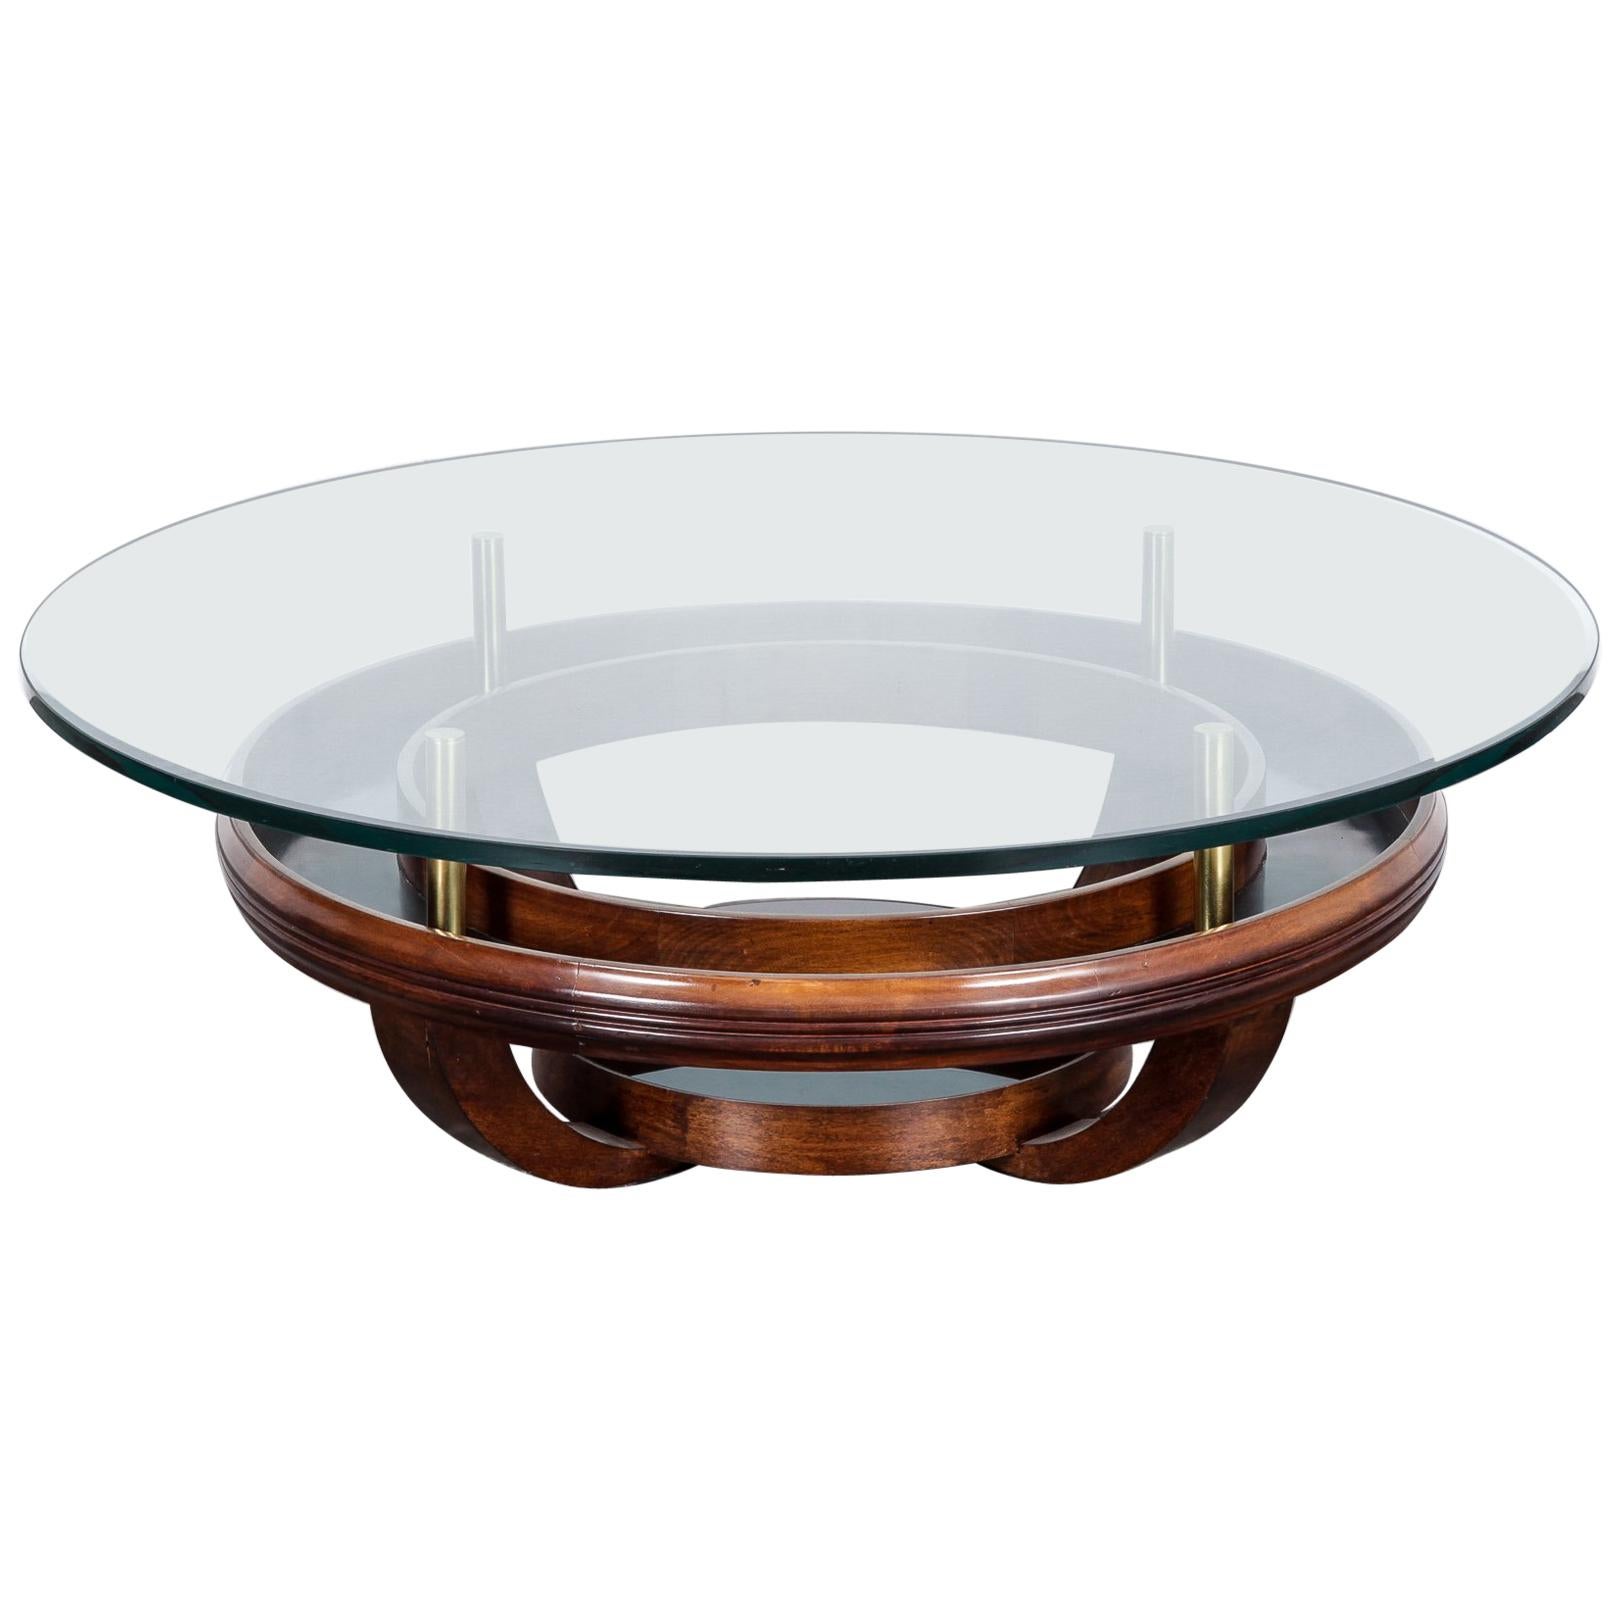 Unique Brazilian Bi-Level Glass Top Round Coffee Table with Wood Base